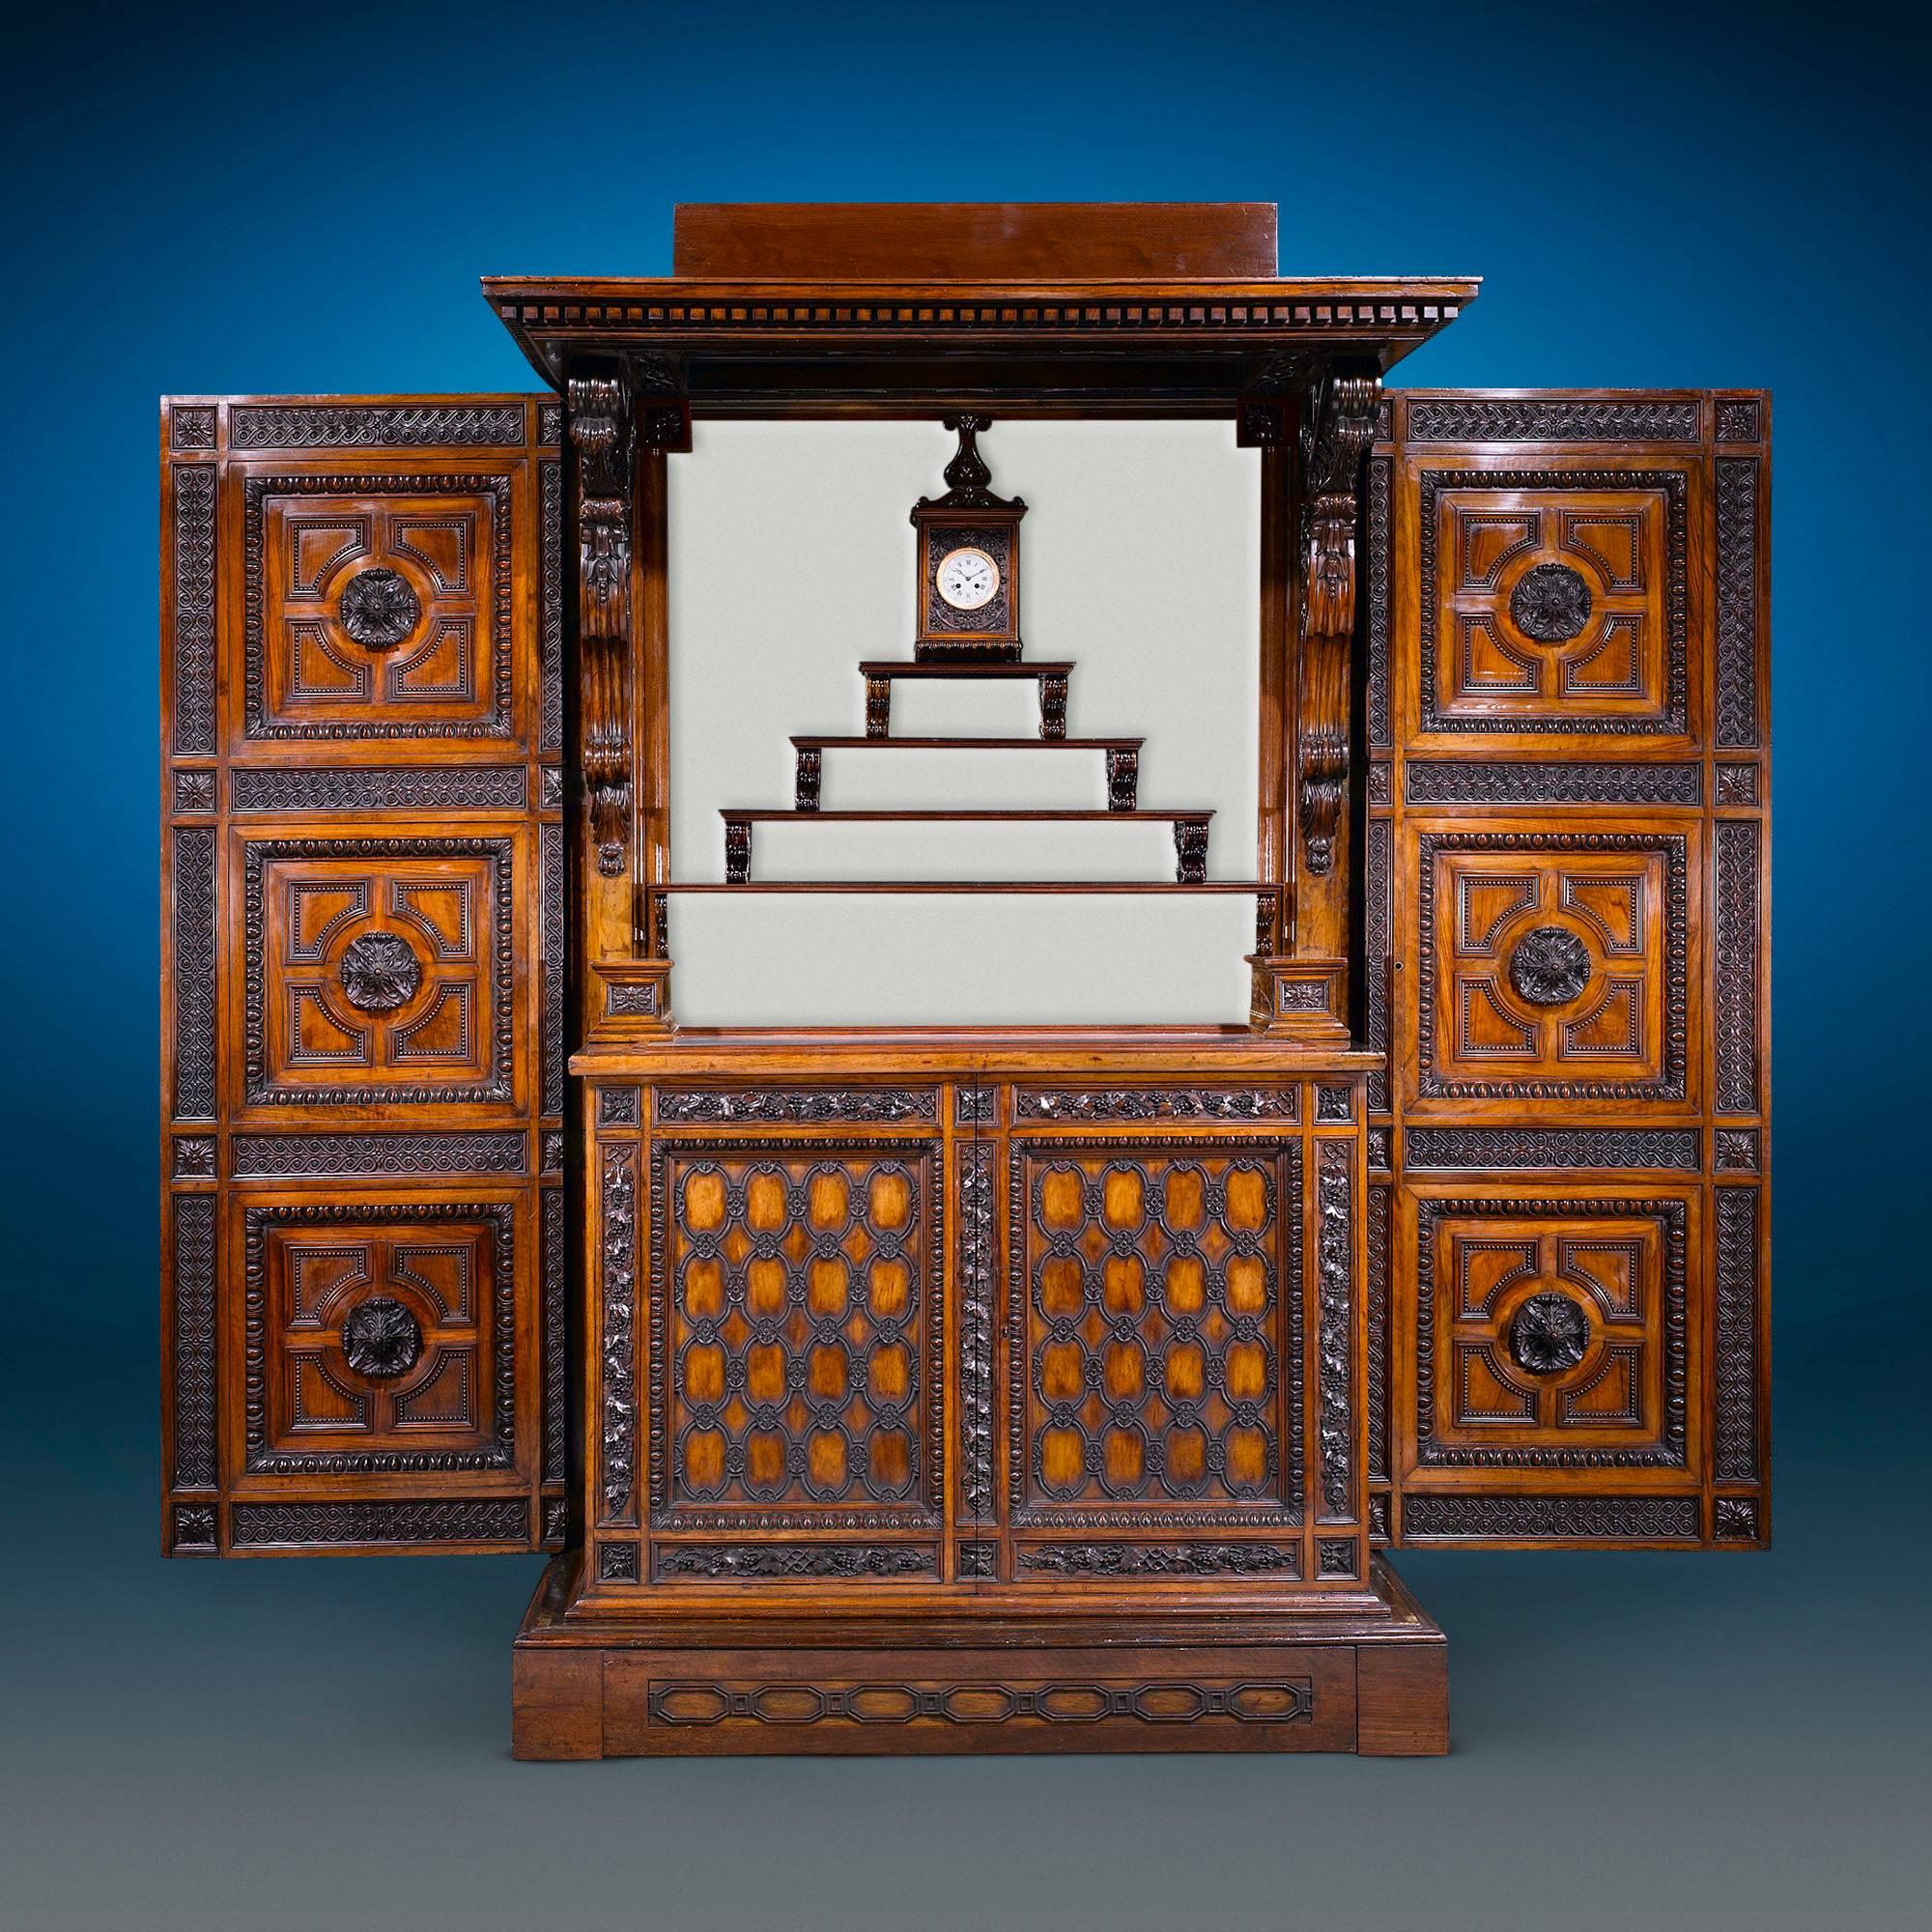 Majestic carving envelopes this amazing and monumental Italian cabinet crafted by the famed Angiolo Barbetti of Florence. A leading figure in Italian woodworking during the 19th century, furnishings by Barbetti are truly precious finds. A cabinet of